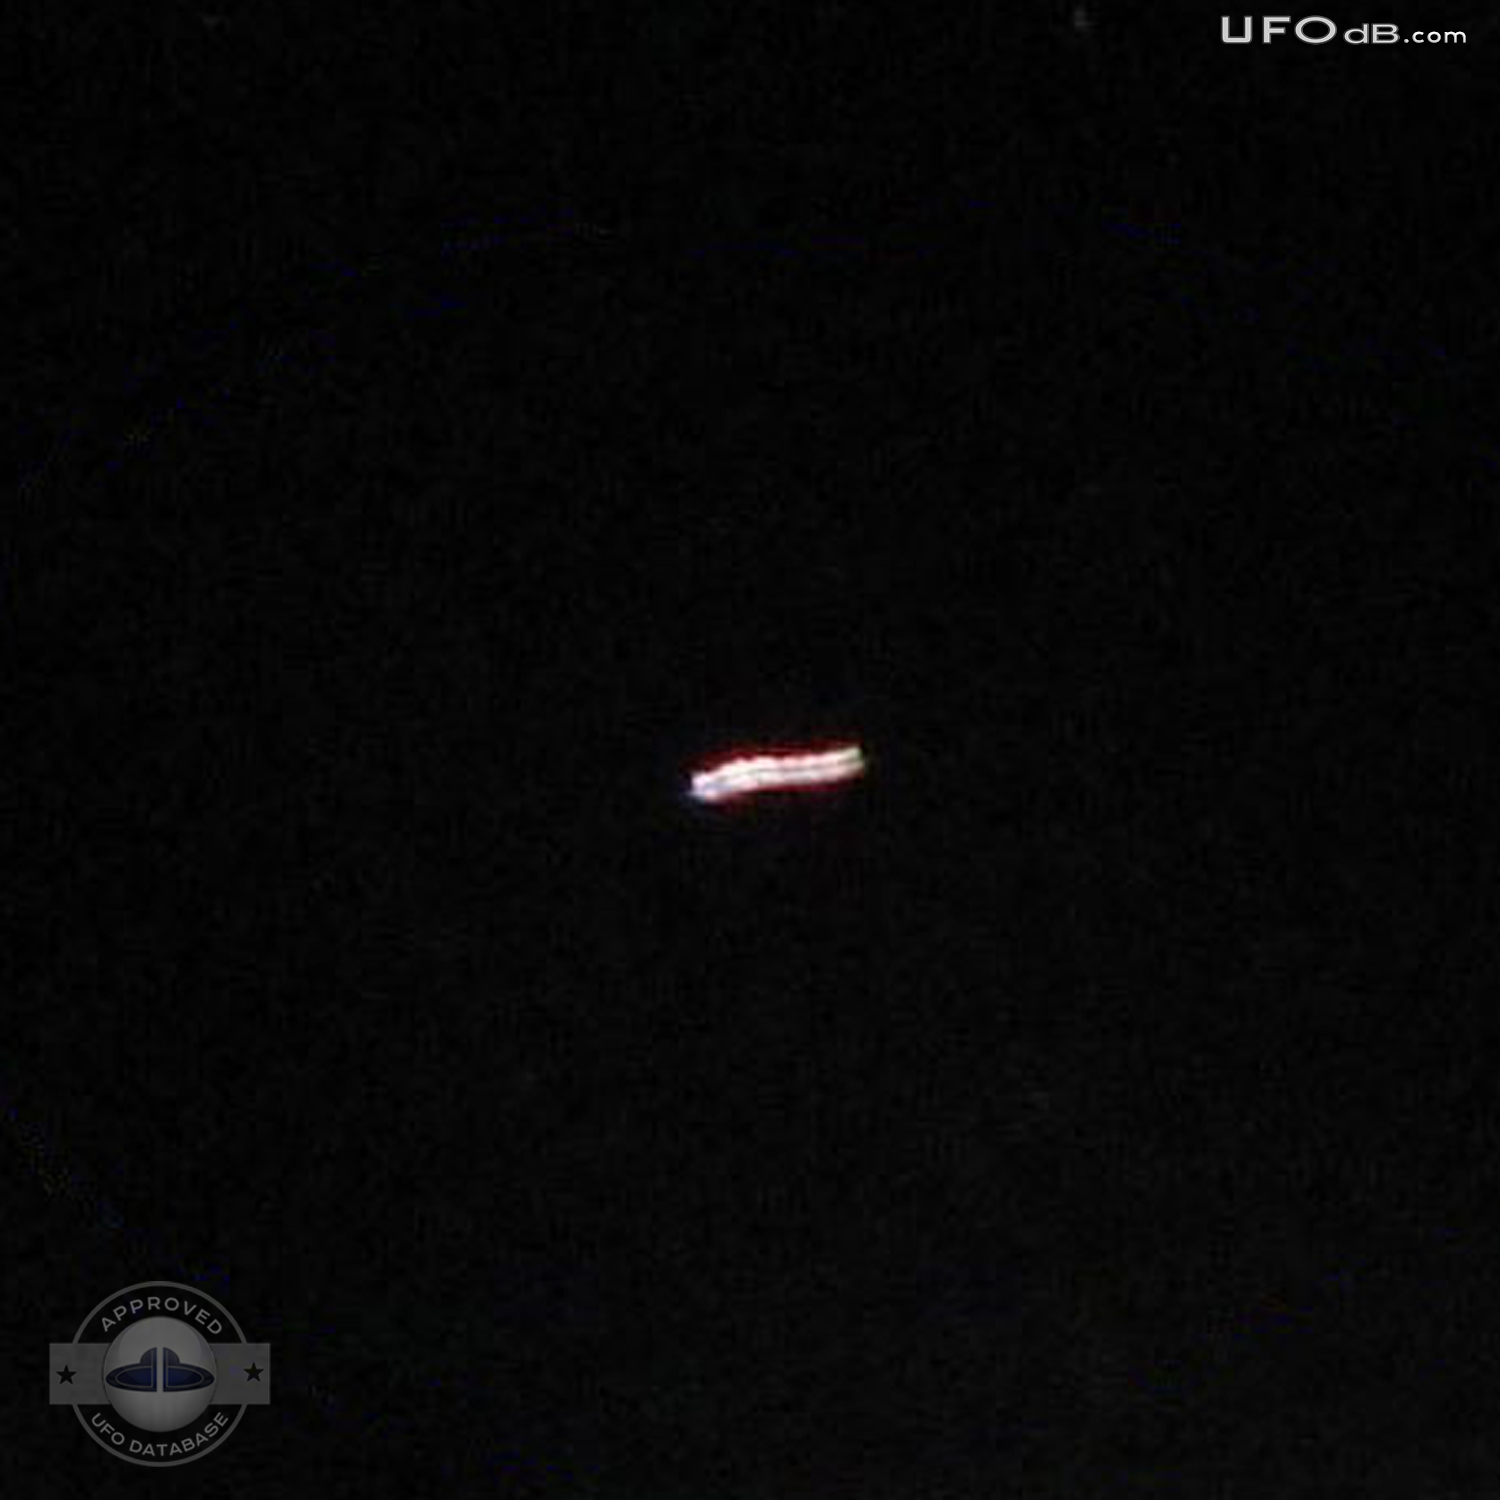 Bouncing UFO seen during Eclipse in Dominican Republic | December 2010 UFO Picture #313-3